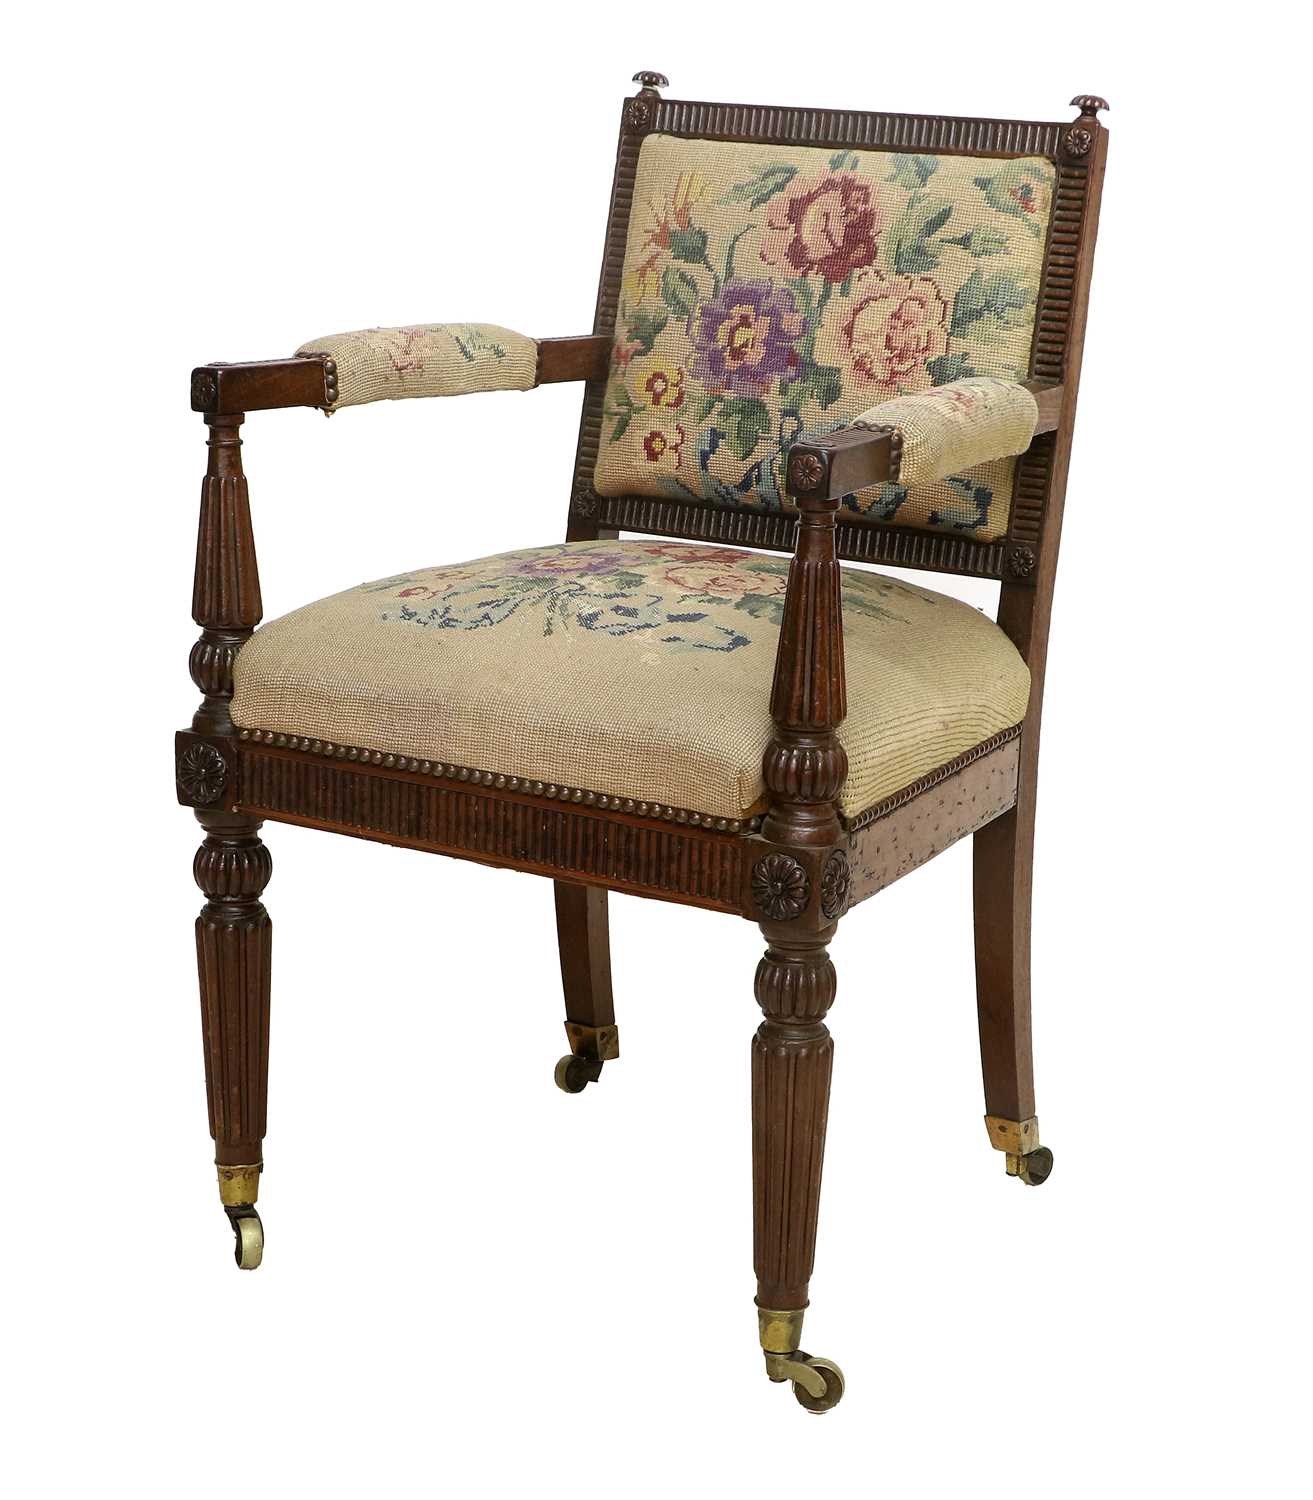 A William IV Carved Mahogany Open Armchair, 2nd quarter 19th century, covered in floral